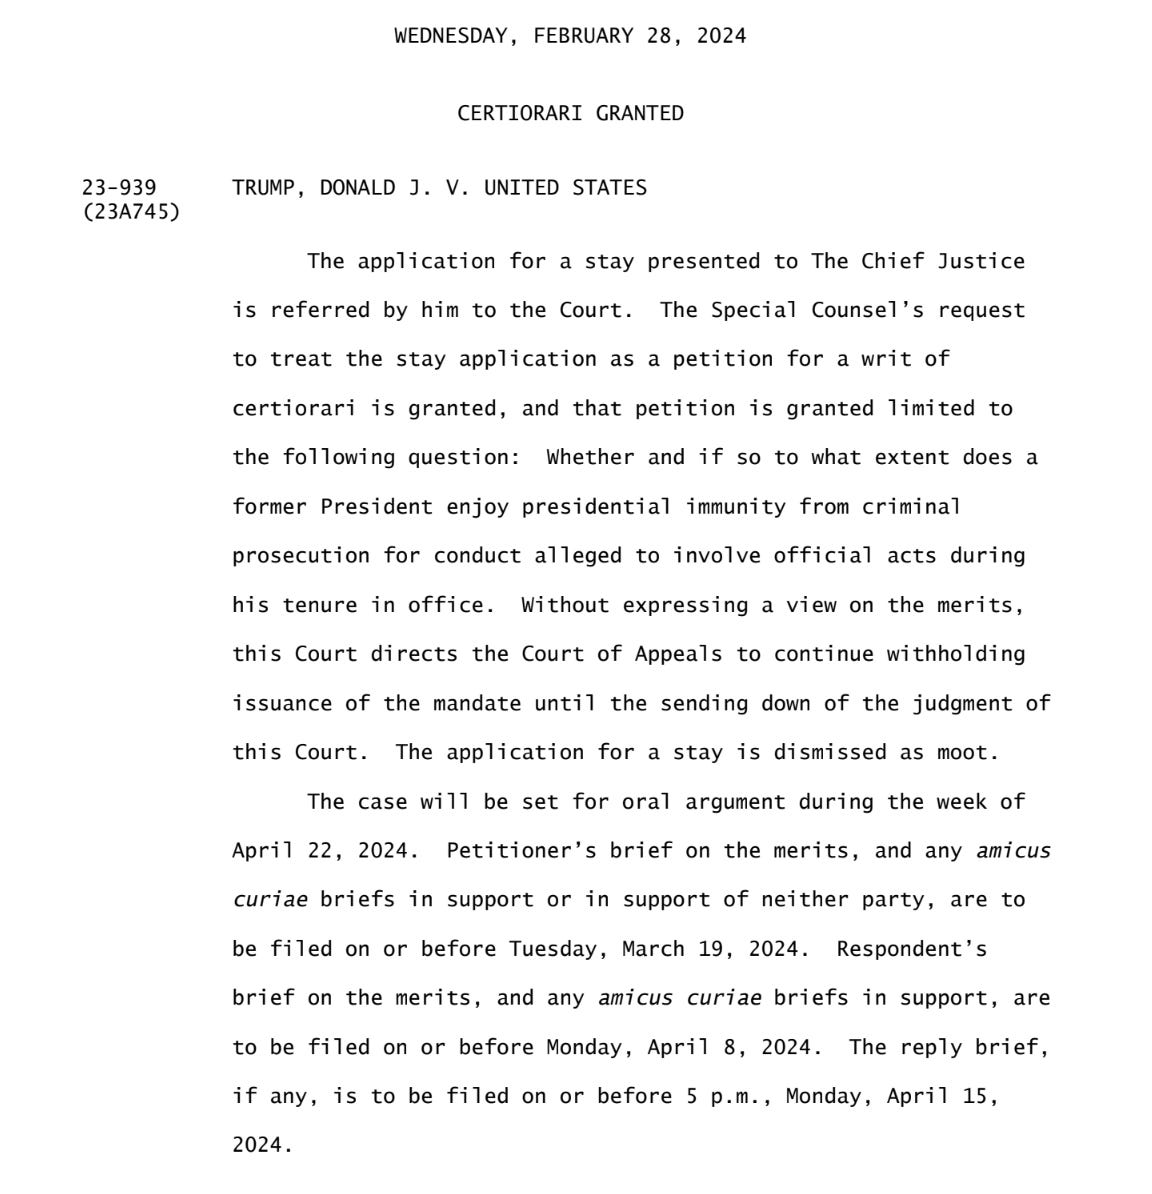 The application for a stay presented to The Chief Justice is referred by him to the Court. The Special Counsel’s request to treat the stay application as a petition for a writ of certiorari is granted, and that petition is granted limited to the following question: Whether and if so to what extent does a former President enjoy presidential immunity from criminal prosecution for conduct alleged to involve official acts during his tenure in office. ... this Court directs the Court of Appeals to continue withholding issuance of the mandate until the sending down of the judgment of this Court. ...  The case will be set for oral argument during the week of April 22, 2024. Petitioner’s brief on the merits ... to be filed on or before Tuesday, March 19, 2024. Respondent’s brief on the merits ... to be filed on or before Monday, April 8, 2024. The reply brief, if any, is to be filed on or before 5 p.m., Monday, April 15, 2024. 